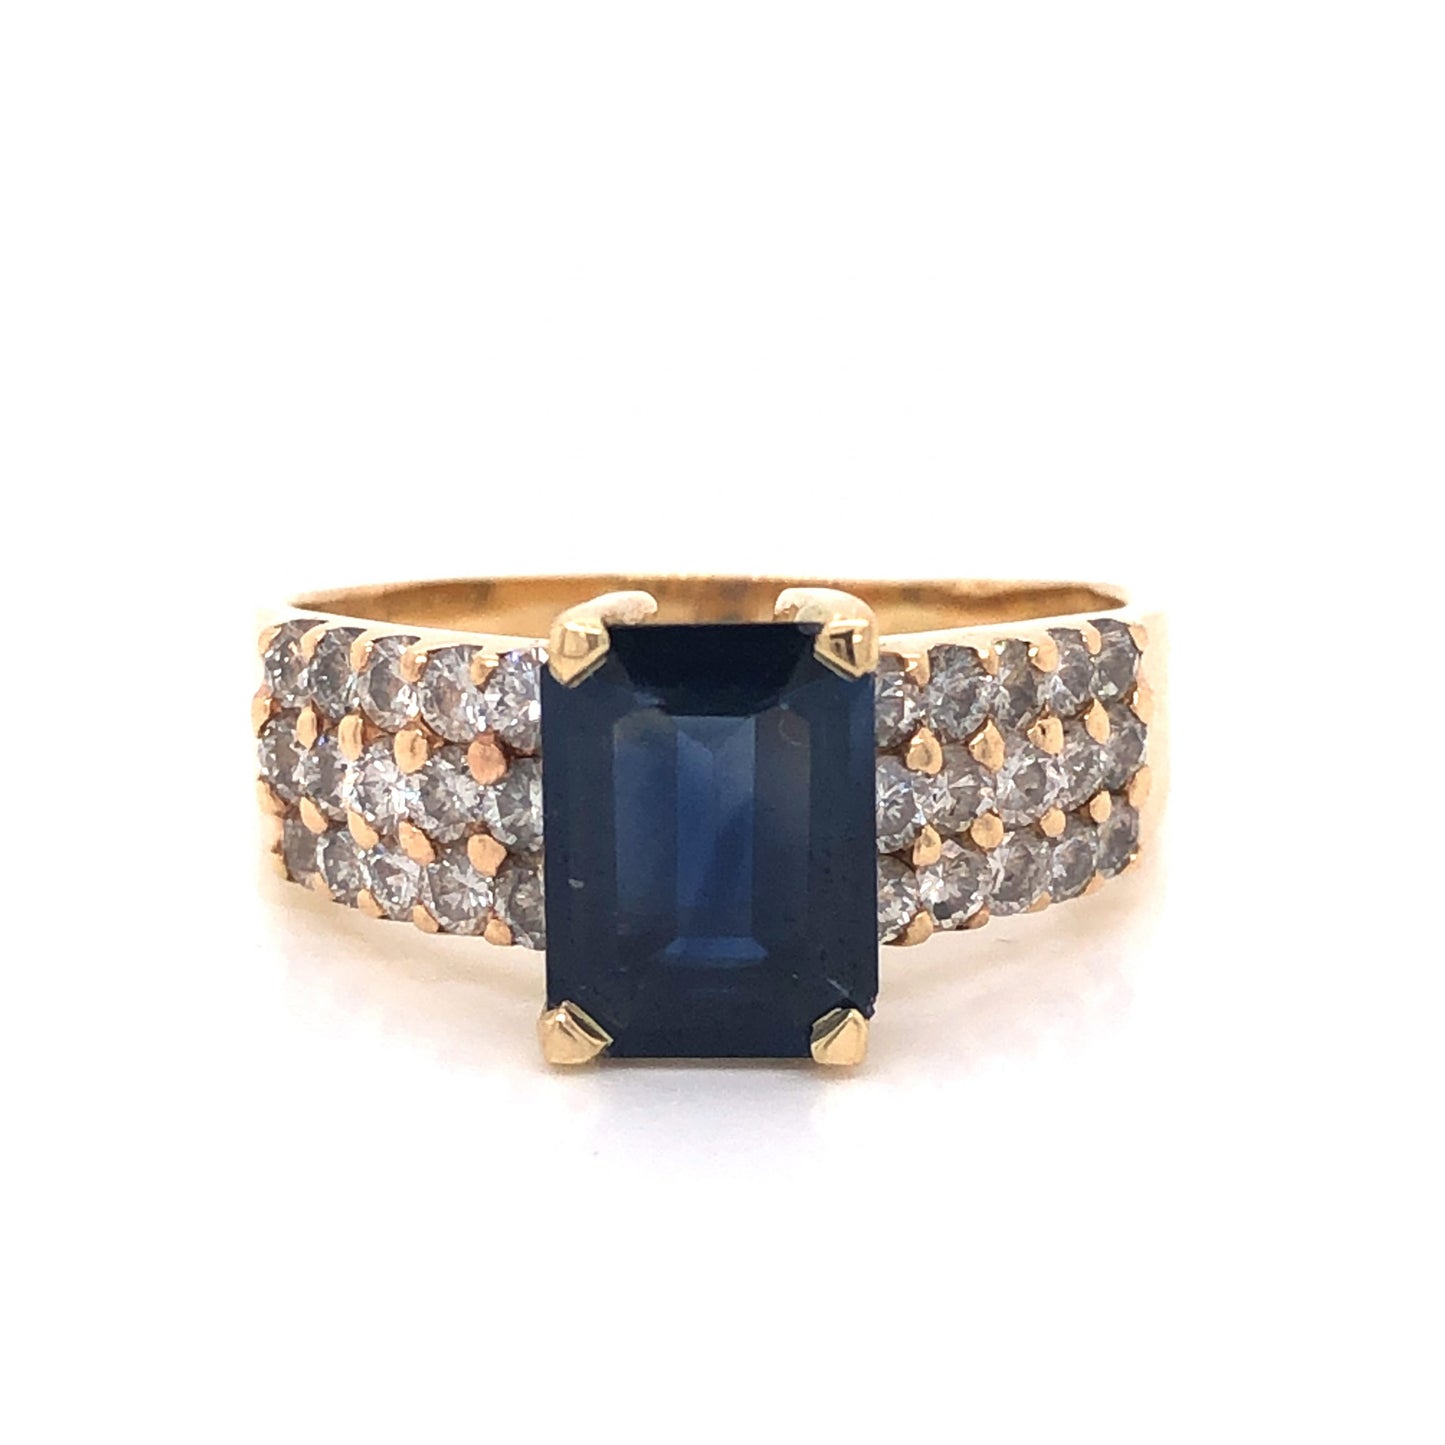 1.79 Emerald Cut Sapphire Engagement Ring in 14k Yellow Gold